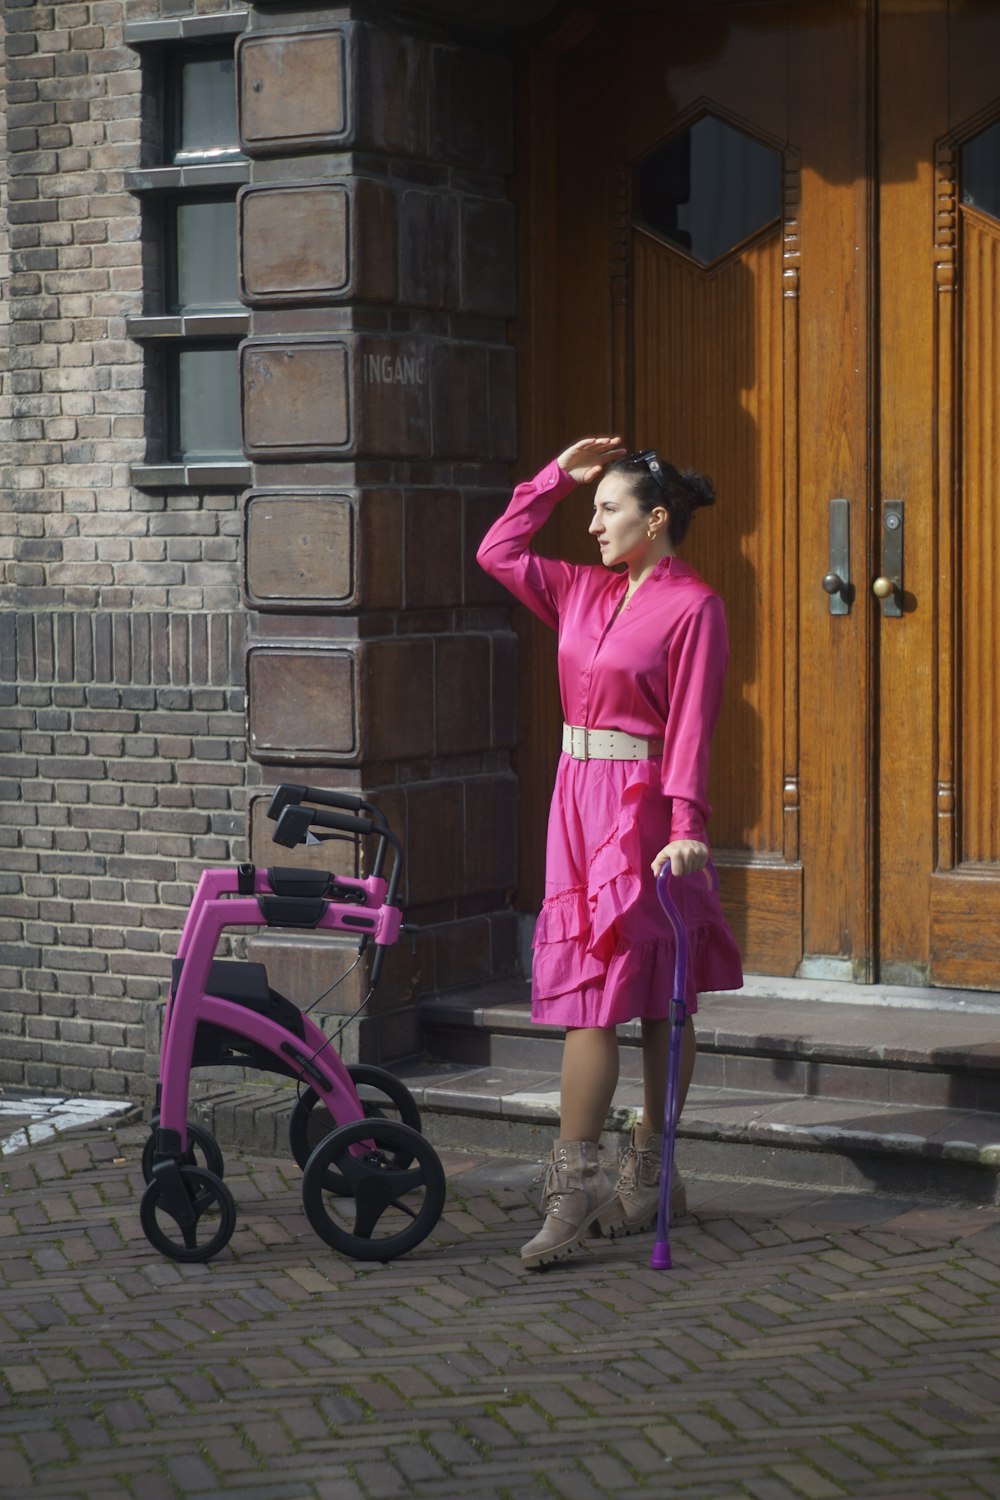 a woman in a pink dress standing next to a pink stroller